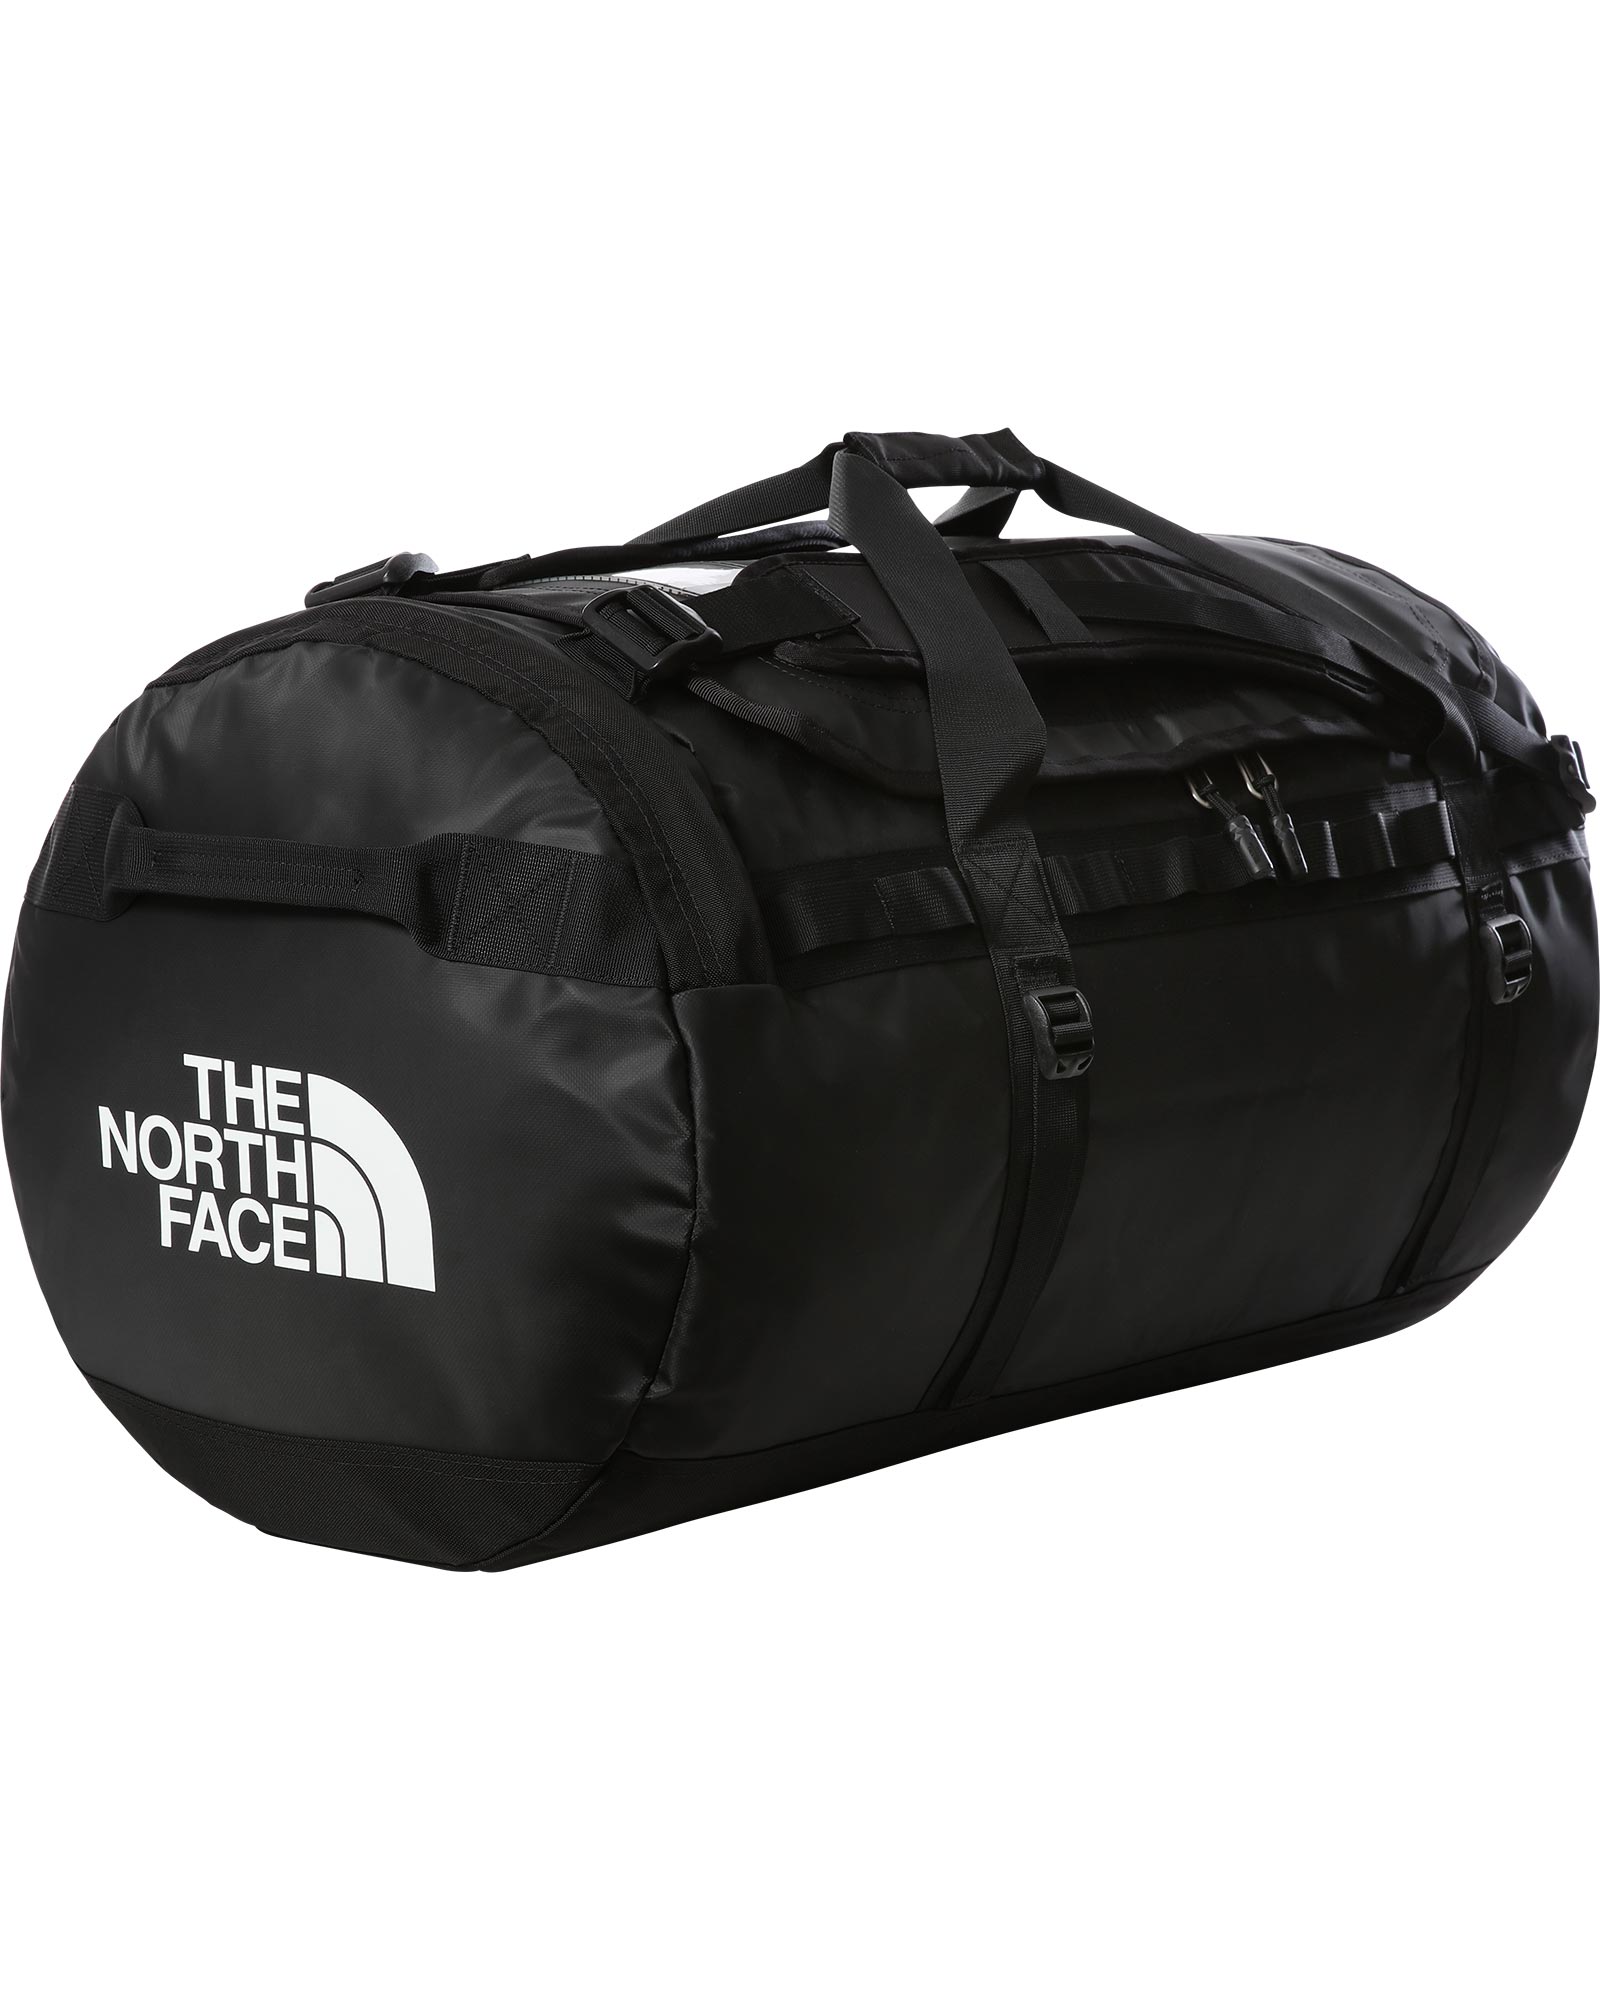 The North Face Base Camp Duffel Large 95L - TNF Black/TNF White